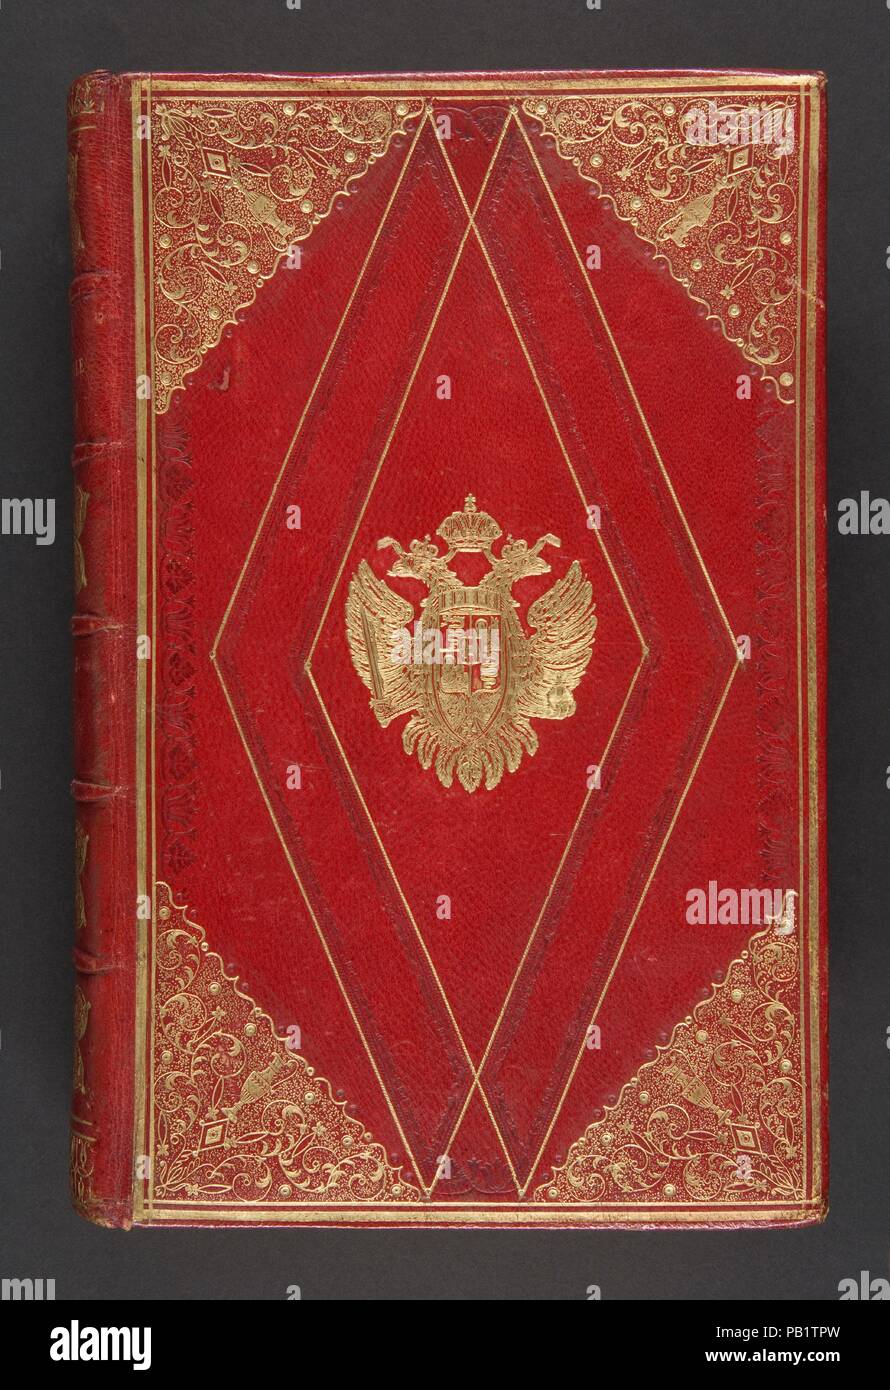 Codice civile generale austriaco. Binder: Luigi Lodigiani (Italian, 1778-1843). Dimensions: Length: 9 13/16 in. (25 cm). Date: 1815.  Contemporary red morocco gold- and blind-tolled binding with large corners with a floral motif and central armorial stamps of Francis I, Emperor of Austria (1768-1835) framed by a double-diamond motif; blue silk doublures.  This presentation binding was bound by Lodigiani of Milan (1777-1843), the greatest Italian bookbinder of his time. Signed at foot of spine 'Lodisiana (six)/Rel.'. Museum: Metropolitan Museum of Art, New York, USA. Stock Photo